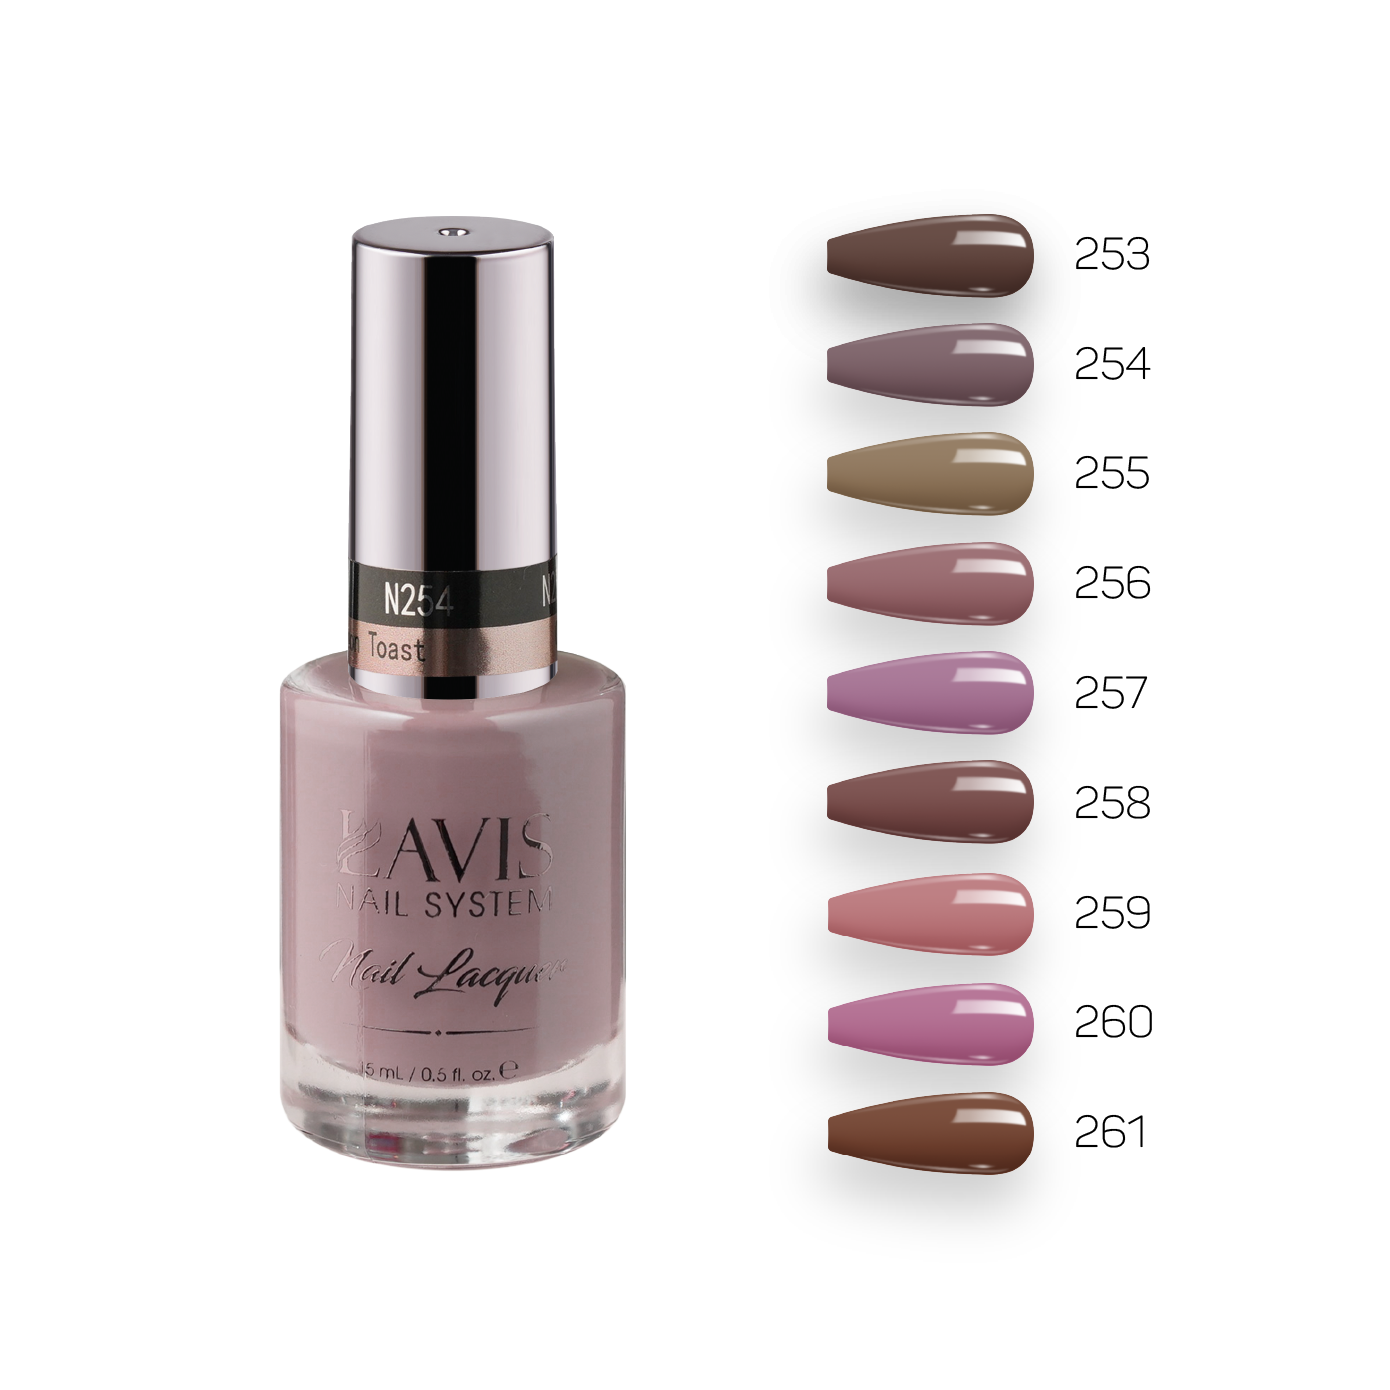 Lavis Healthy Nail Lacquer Fall Winter Set N3 (9 colors) : 253, 254, 255, 256, 257, 258, 259, 260, 261